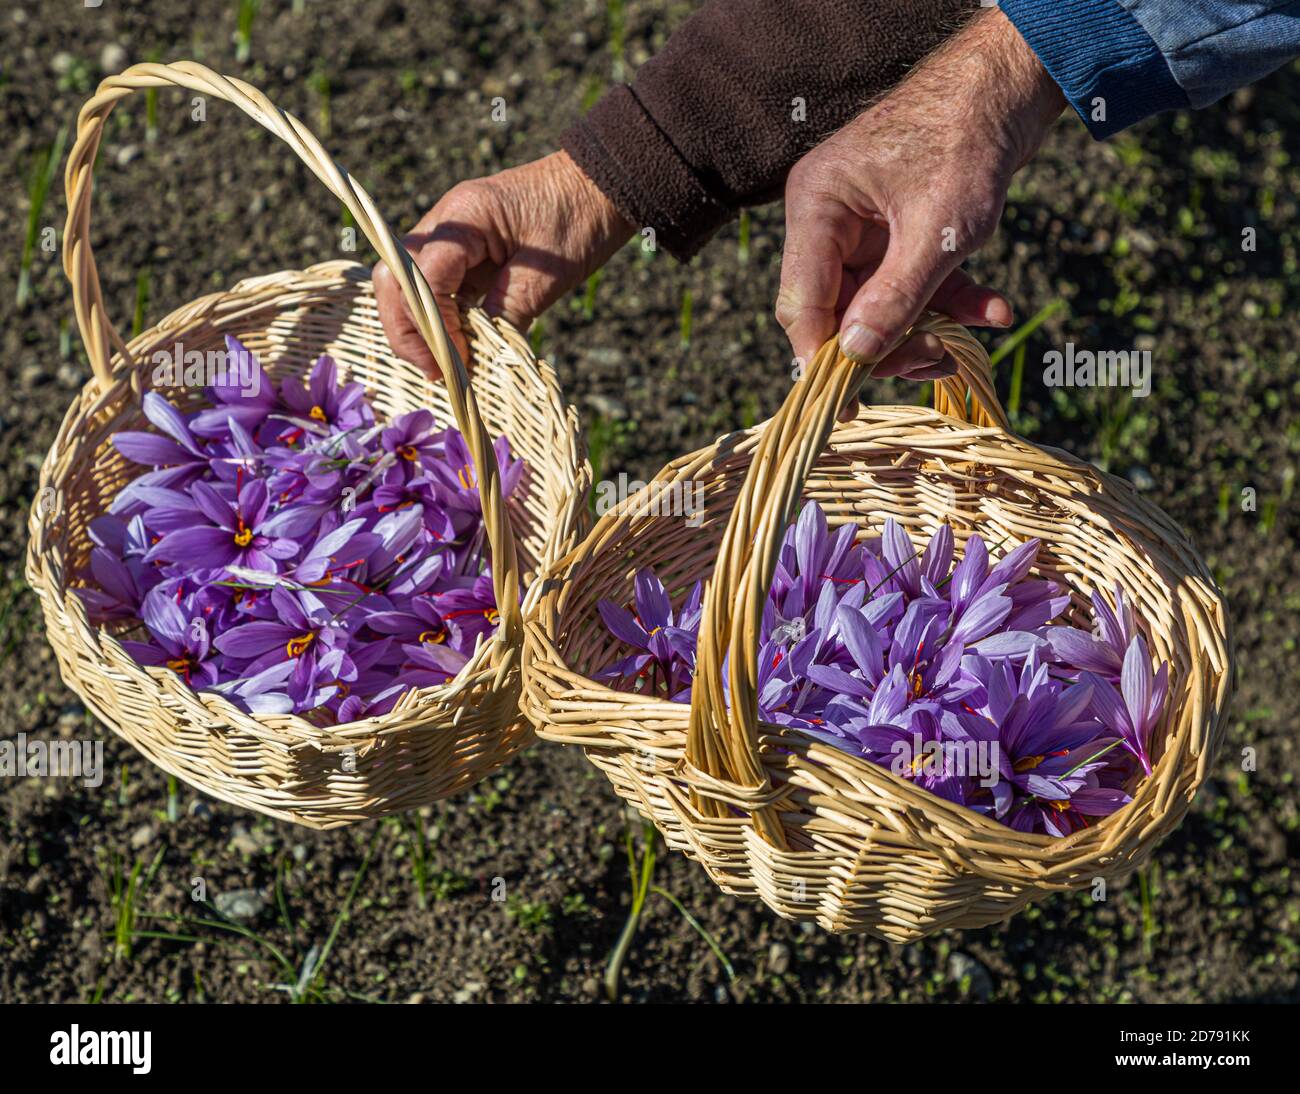 Saffron flowers are collected in small baskets. Saffron found its way to Valais in Switzerland in the Middle Ages. In the village of Mund, saffron is still grown on very small areas and harvested between October and November. Saffron harvest and processing in Mund, Naters, Switzerland Stock Photo